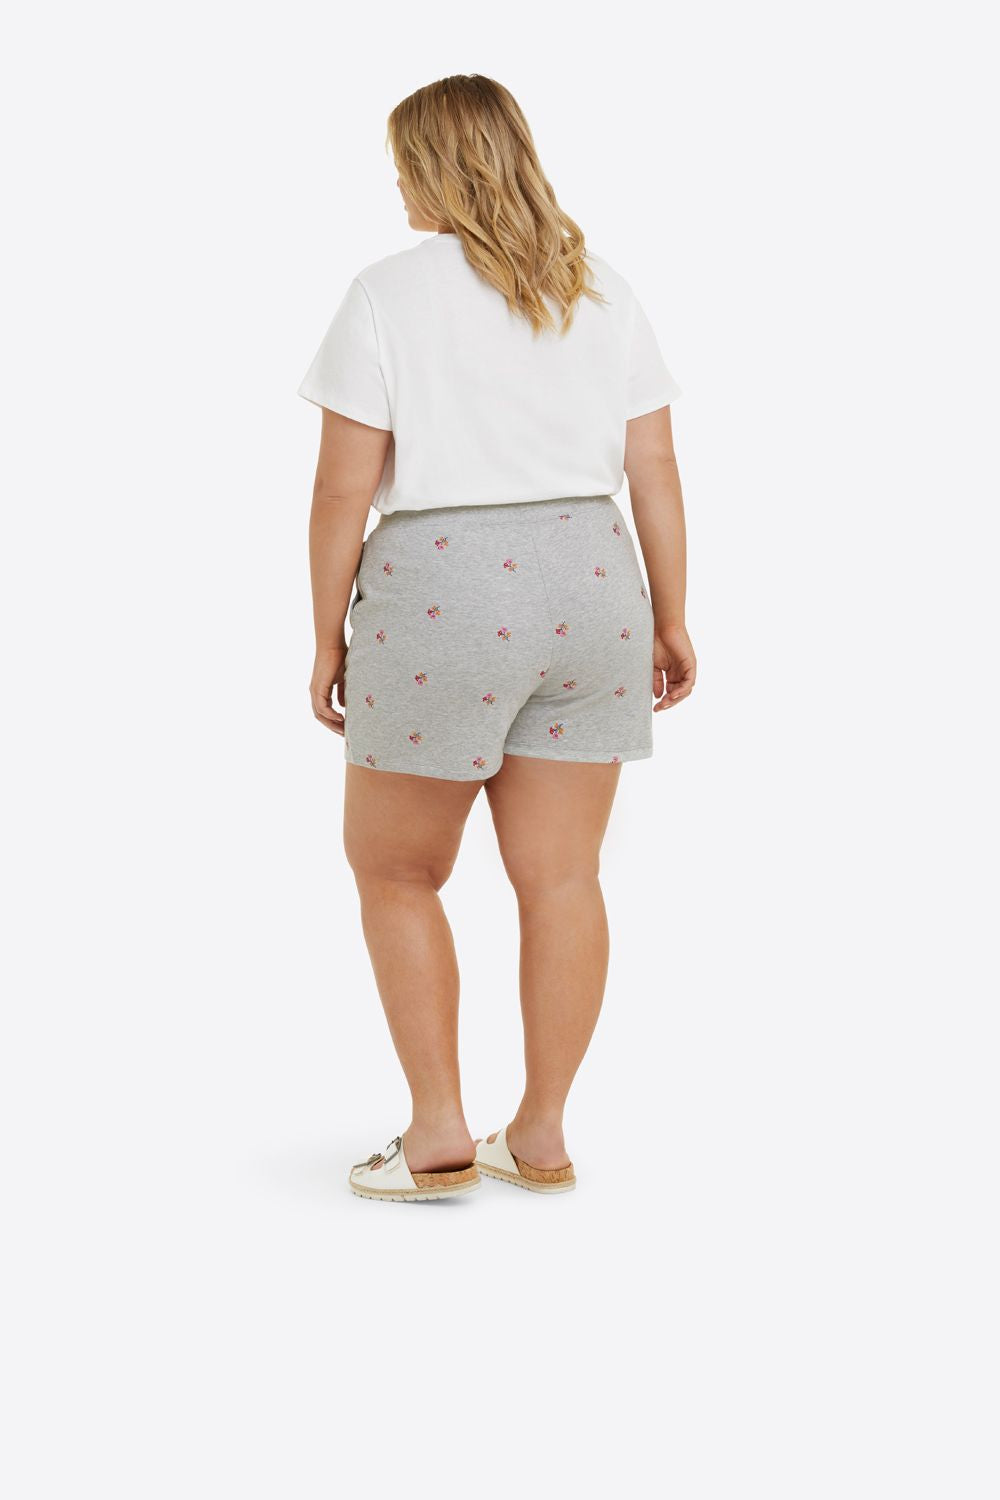 Natalie Sweat Shorts in Embroidered Viola